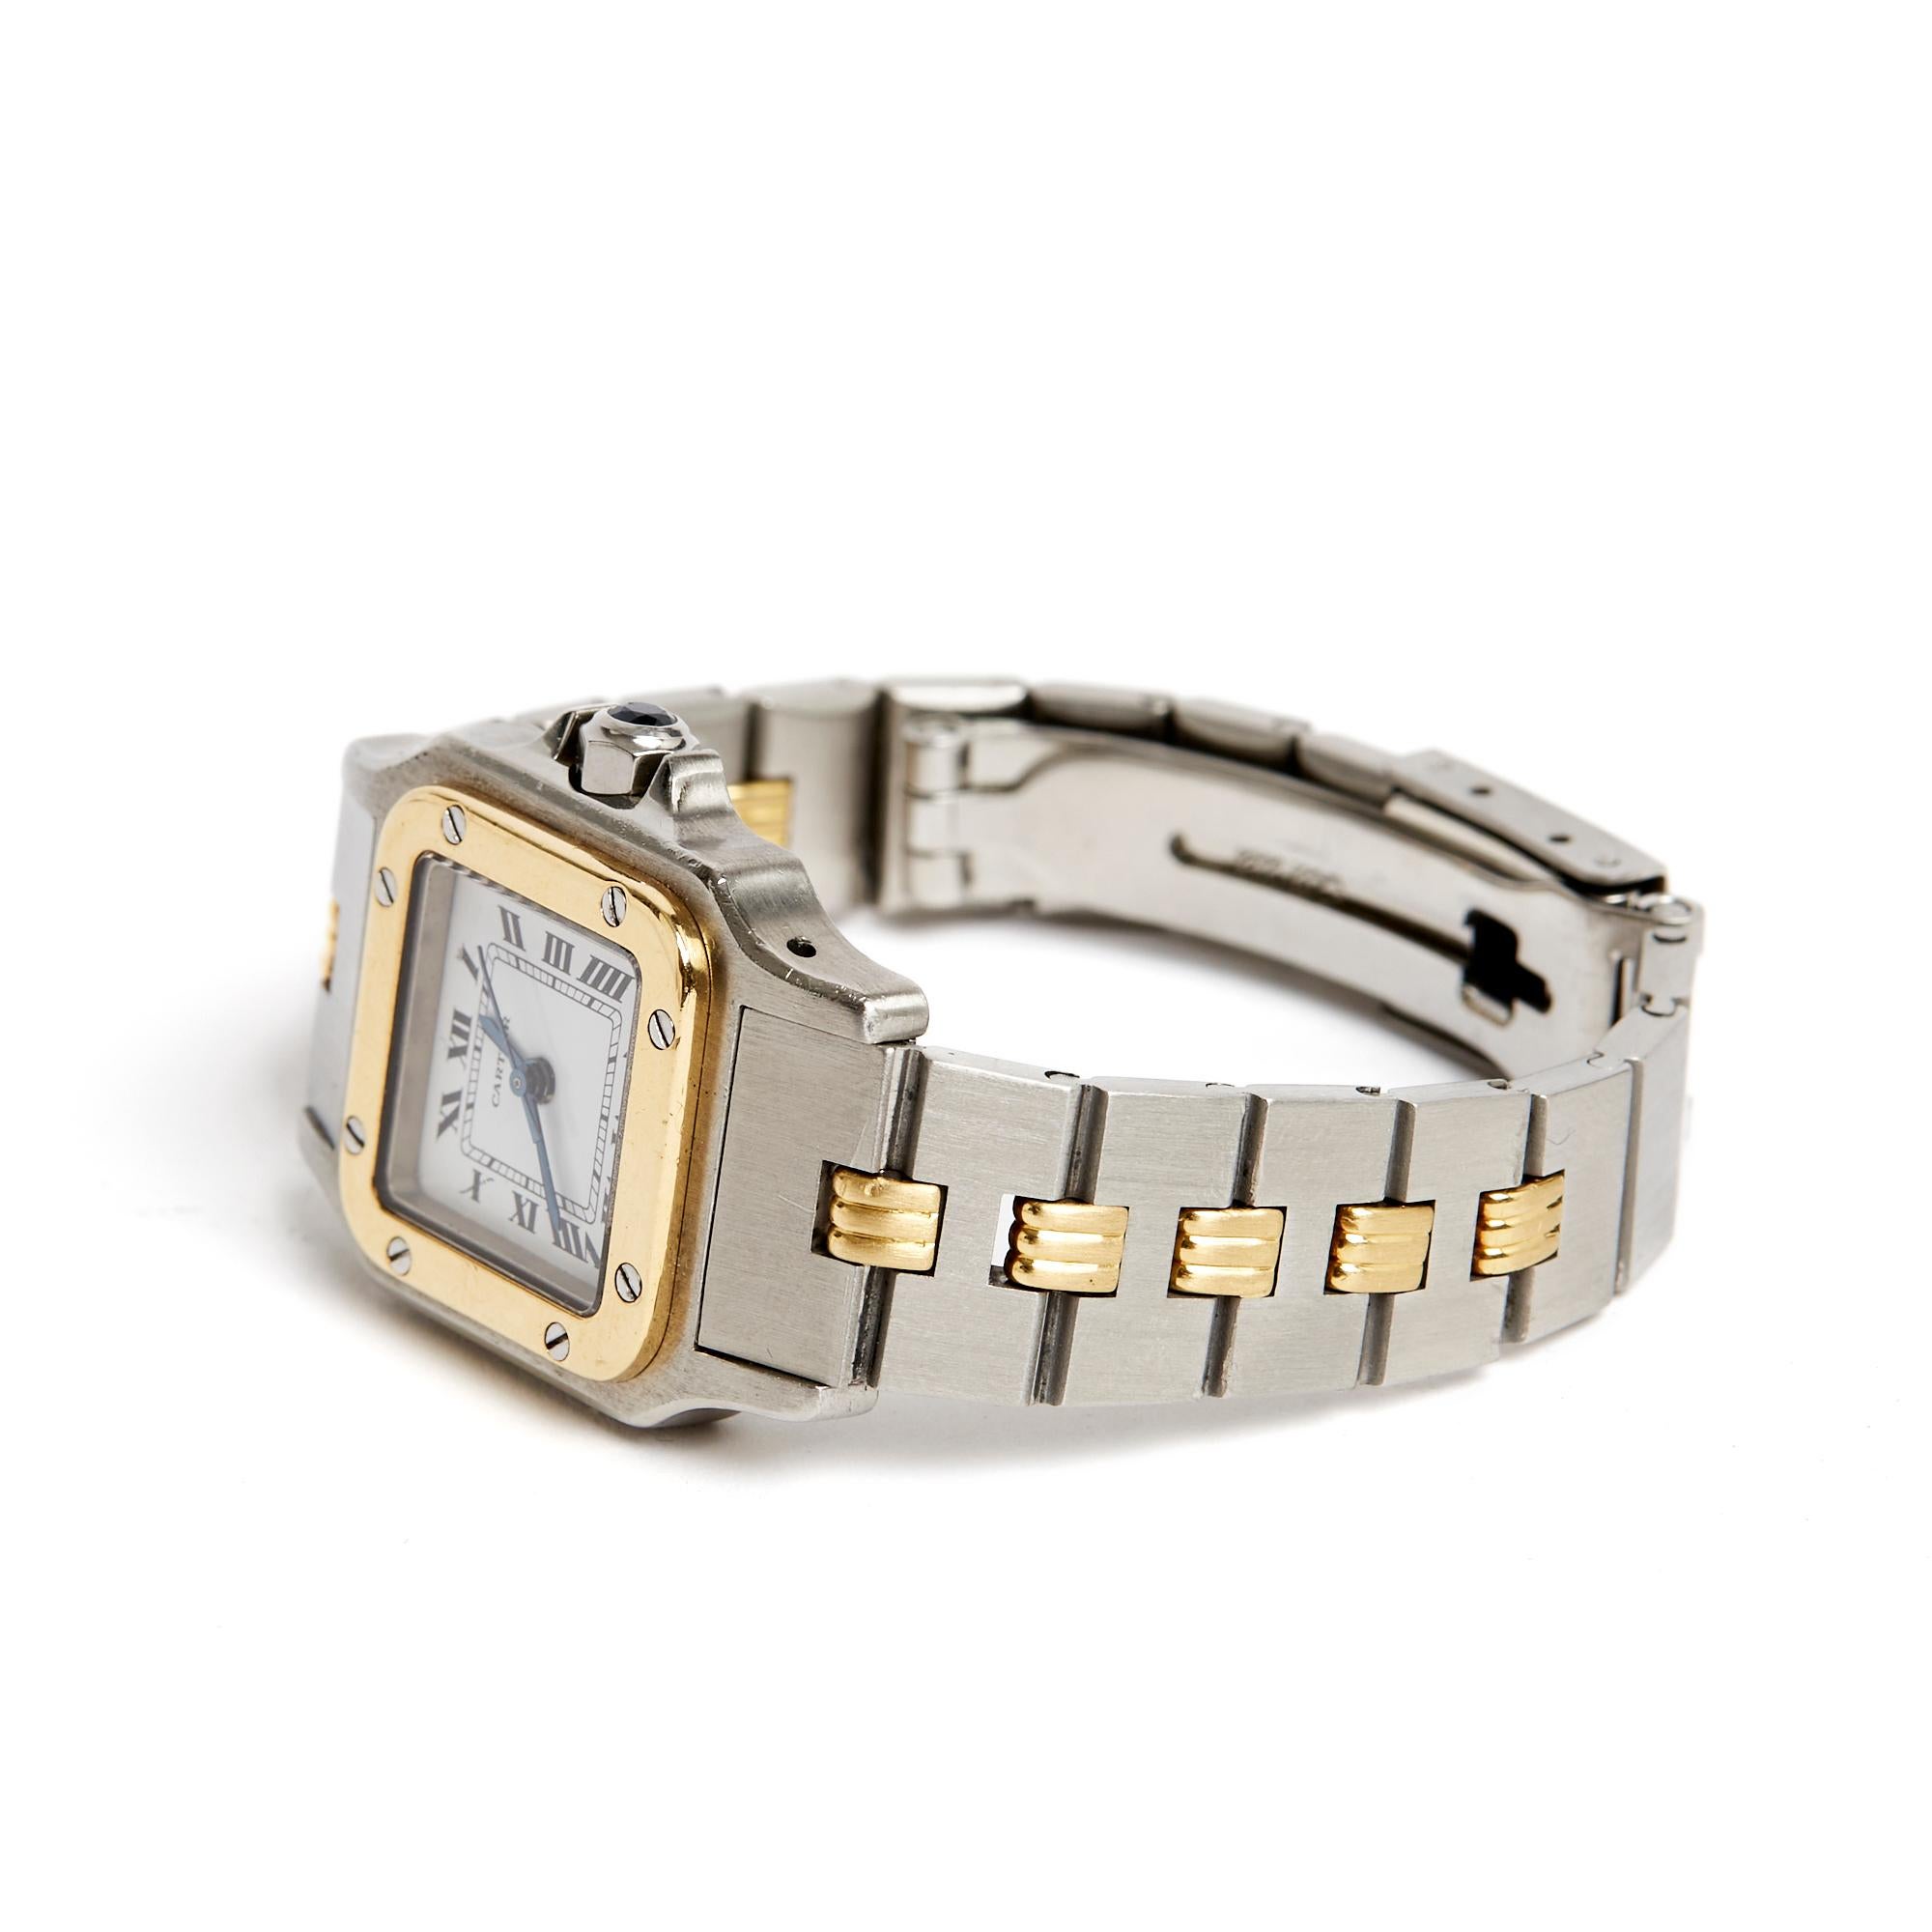 Cartier Santos Lady model watch late 1970, early 1980, in steel and 18K yellow gold, automatic, white dial with railway and Roman numerals, adjustable steel and yellow gold bracelet and folding clasp, crown fitted with a faceted spinel cabochon ,